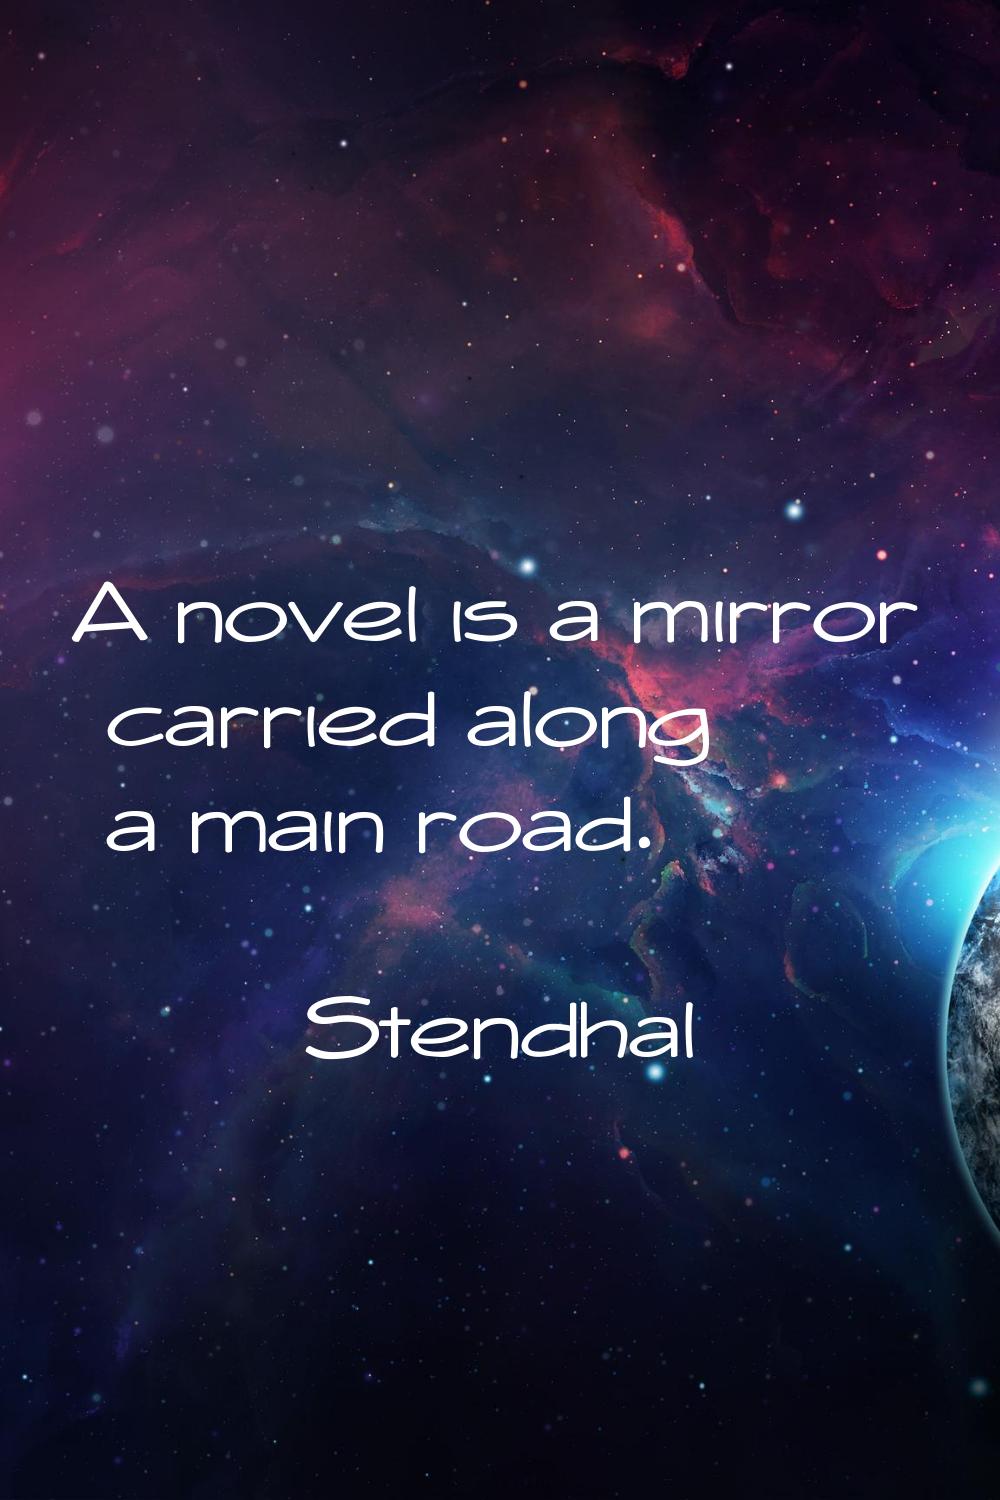 A novel is a mirror carried along a main road.